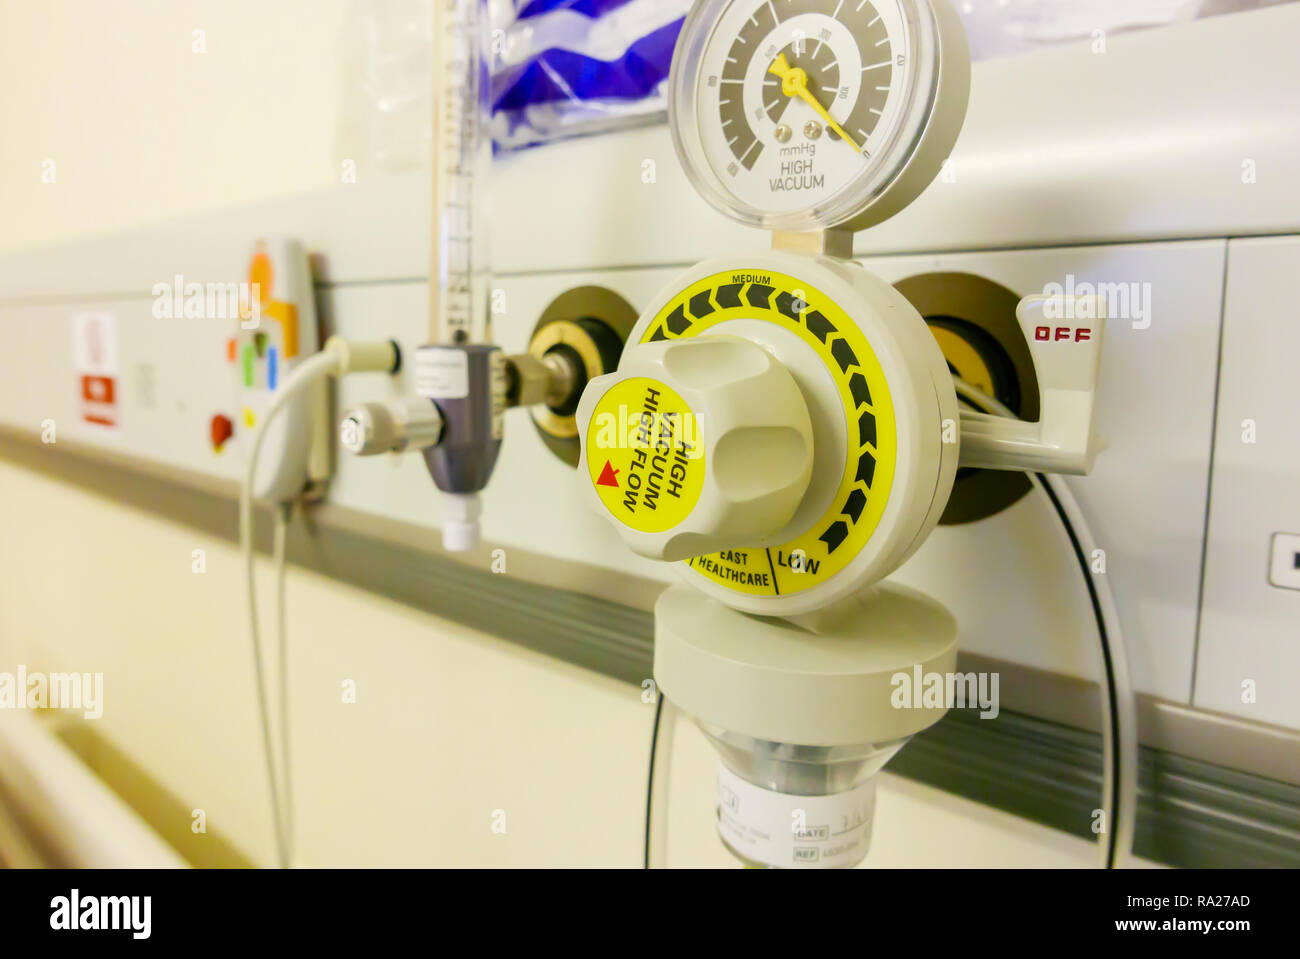 Bed head unit in a hospital ward showing a suction vacuum pressure gauge, an oxygen supply and a nurses call bell. Stock Photo